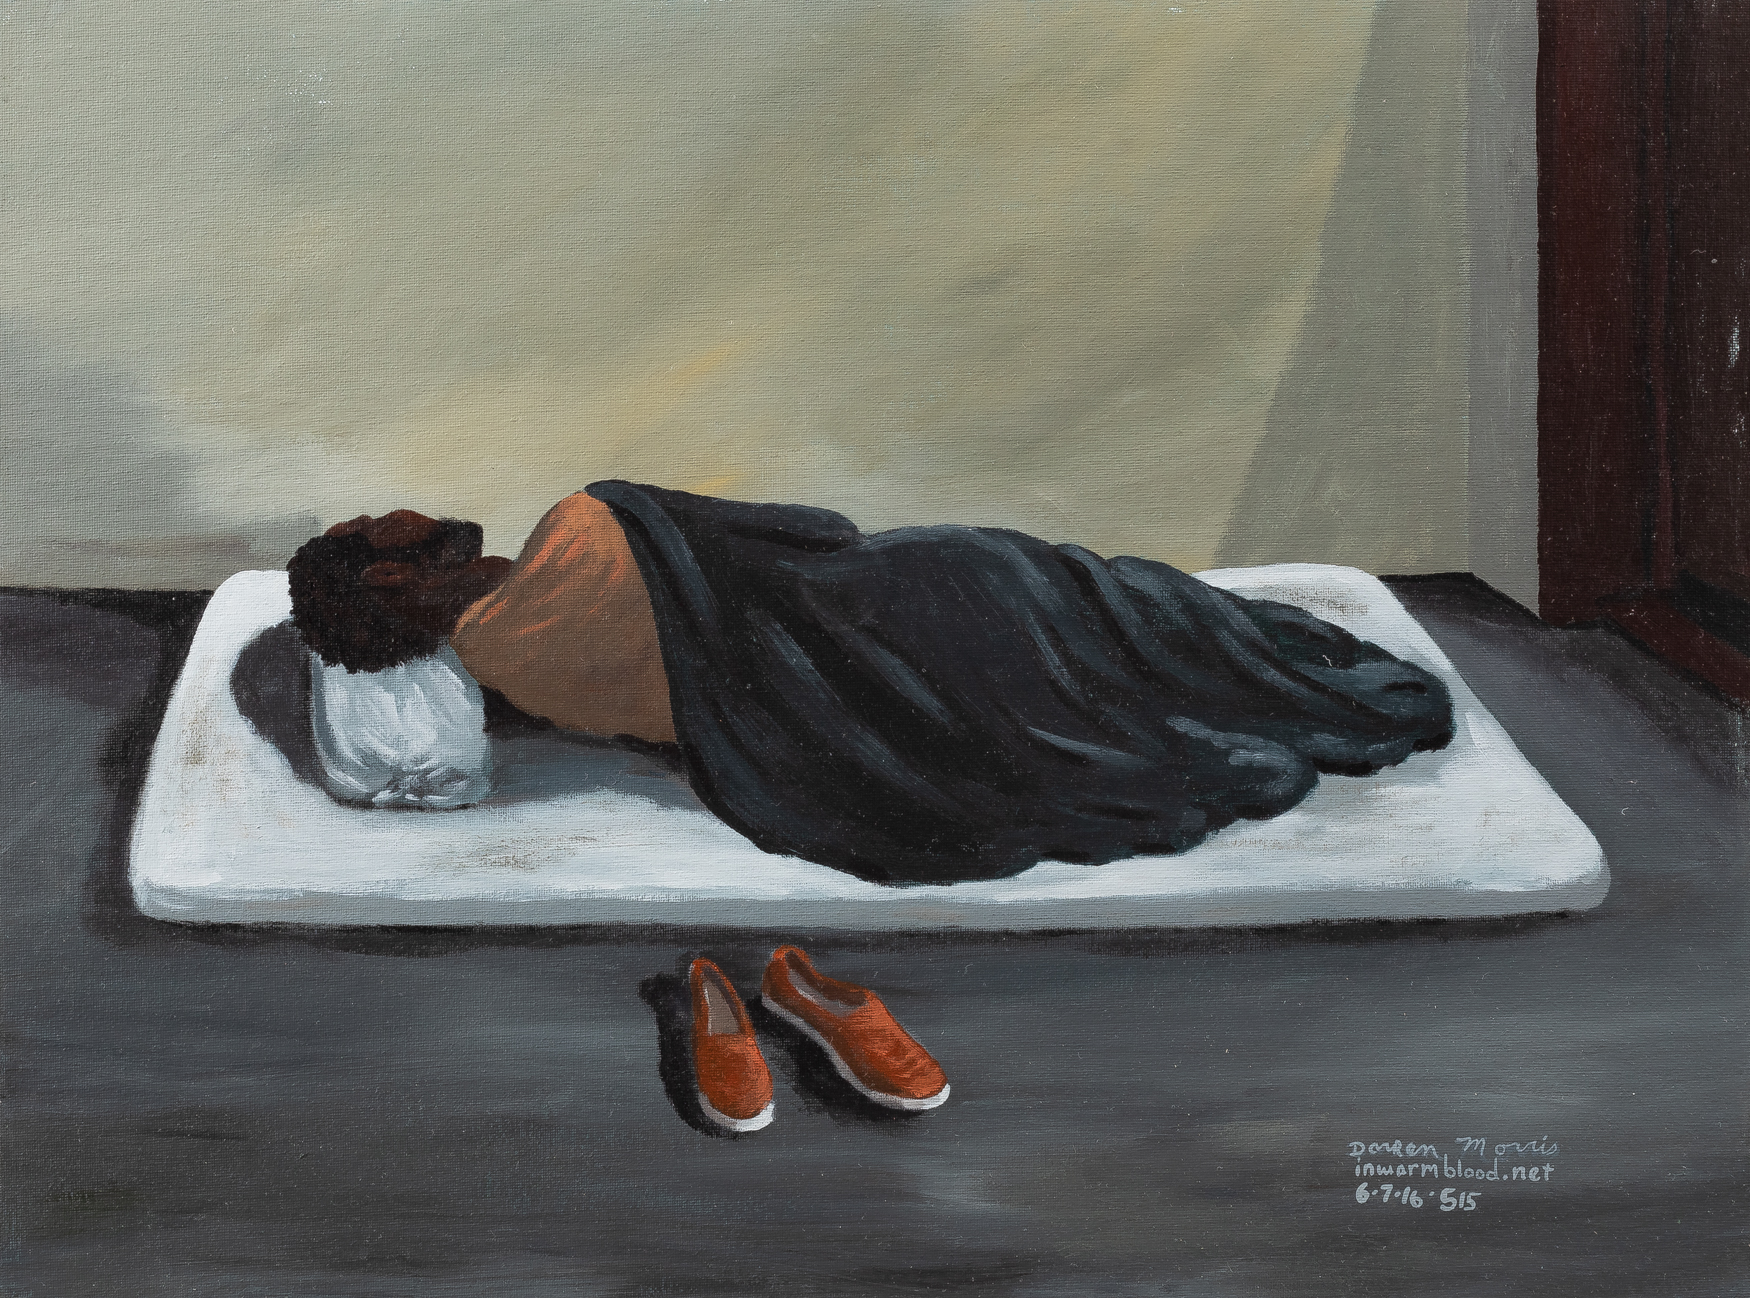 A painting of a man sleeping on the floor in a prison